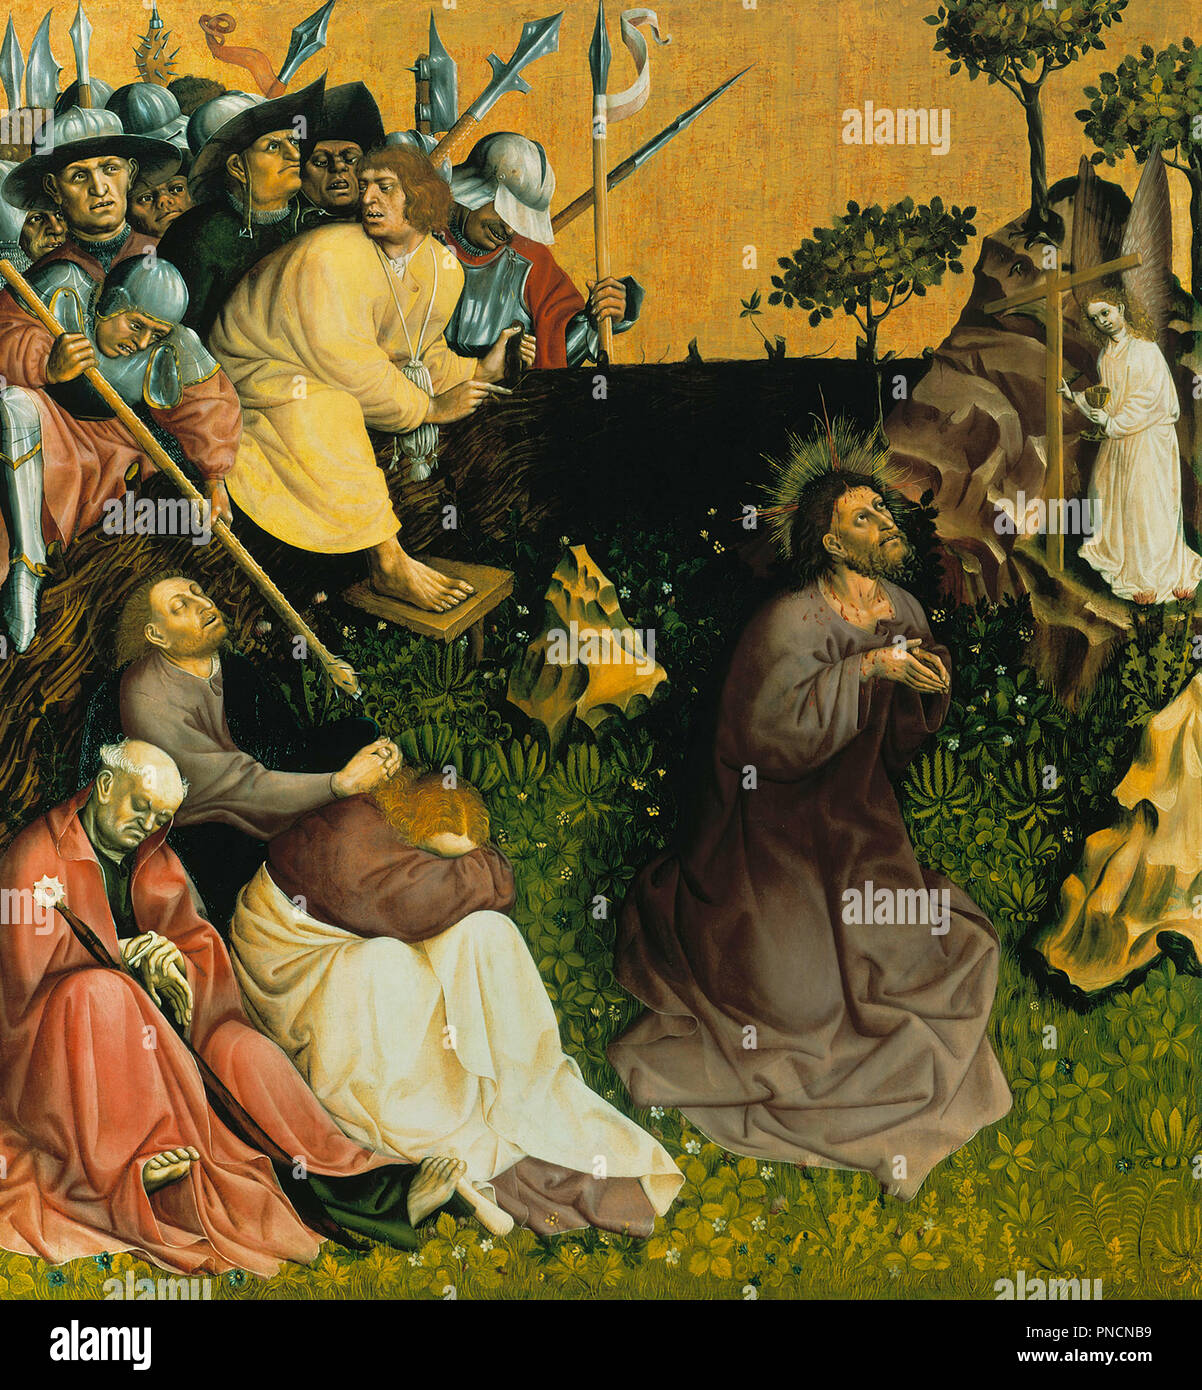 Christ on the Mount of Olives. Date/Period: 1437. Painting. Oil on fir. Height: 150 cm (59 in); Width: 140 cm (55.1 in). Author: HANS MULTSCHER. MULTSCHER, HANS. Stock Photo